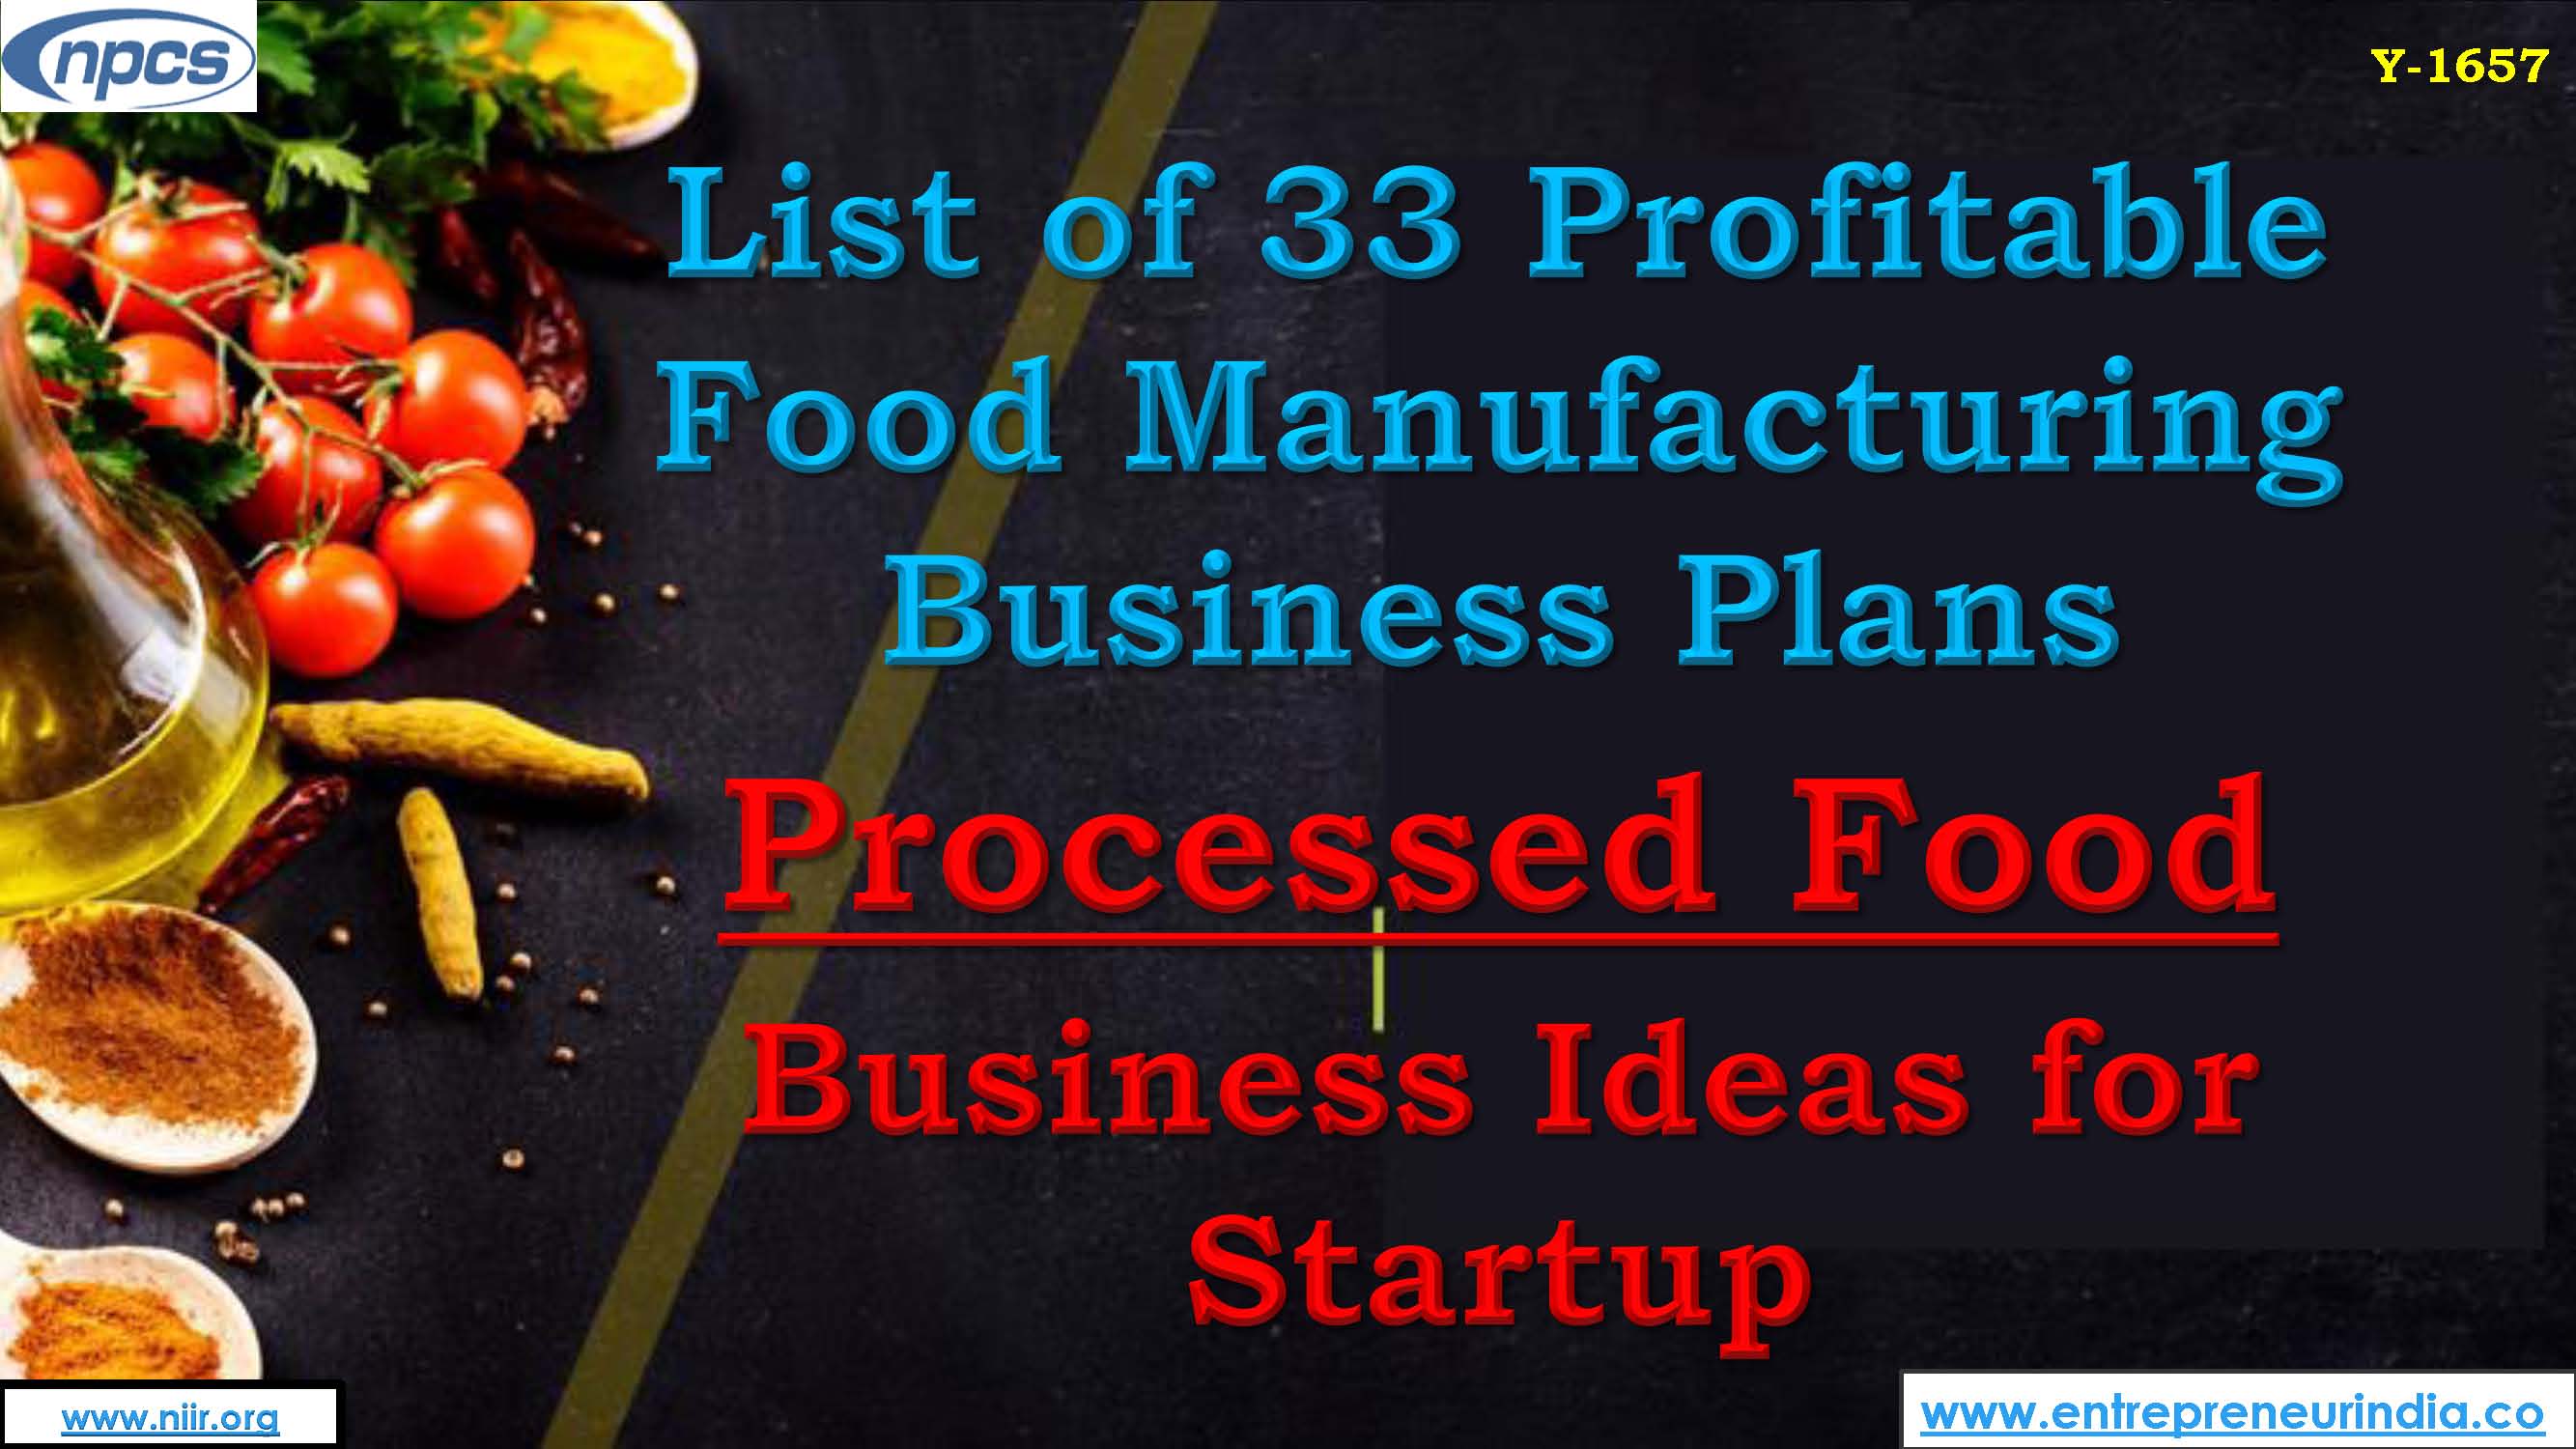 List of 33 Profitable Food Manufacturing Business Plans